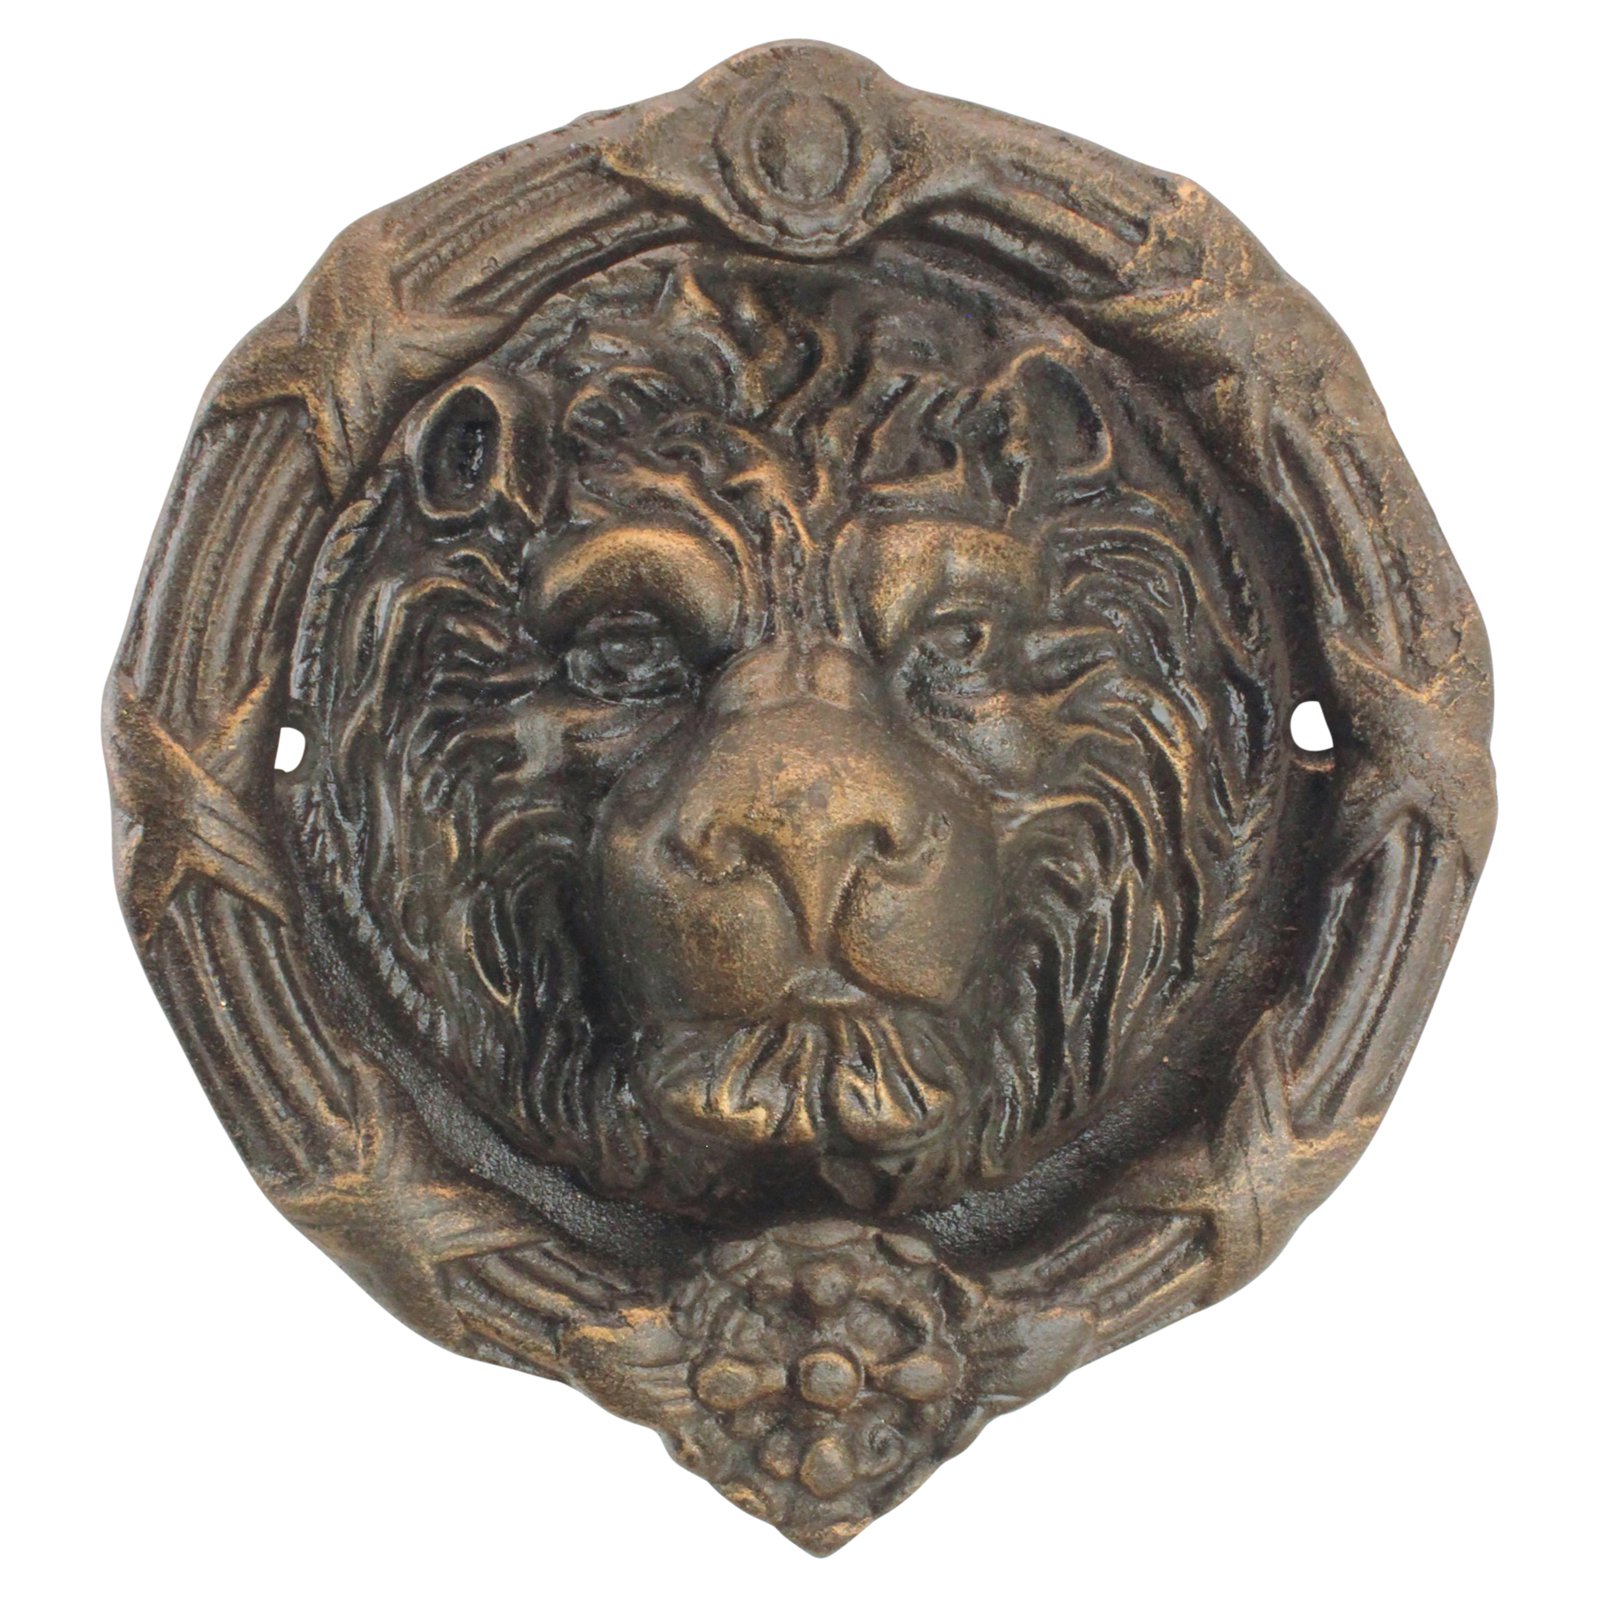 Design Toscano Pride of the Lions Foundry Cast Iron Lion Door Knocker - image 4 of 6